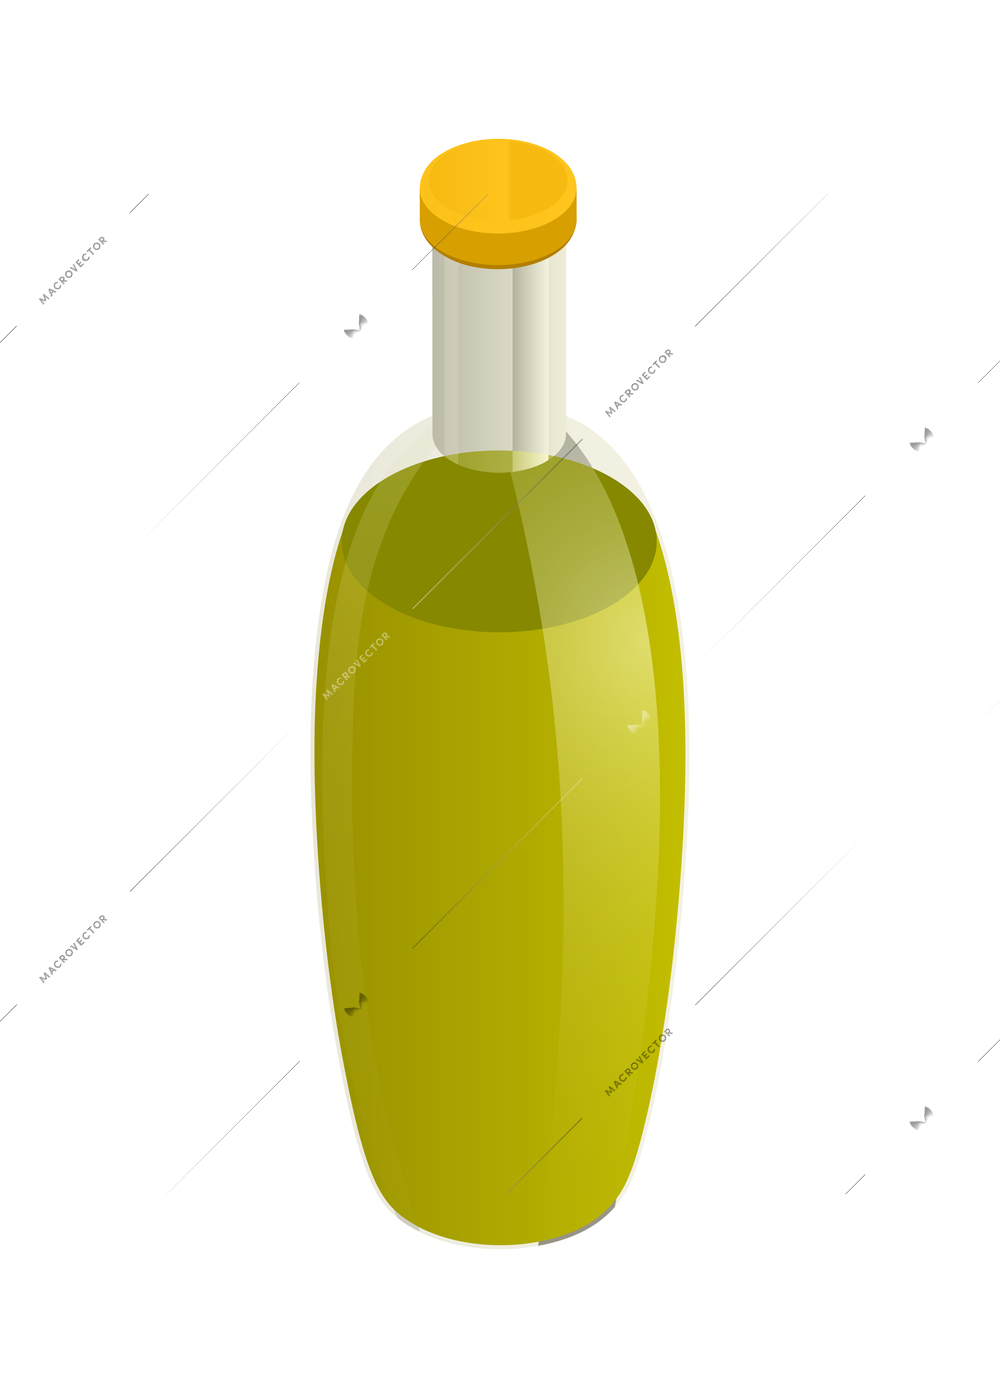 Isometric icon with bottle of olive oil on white background 3d vector illustration